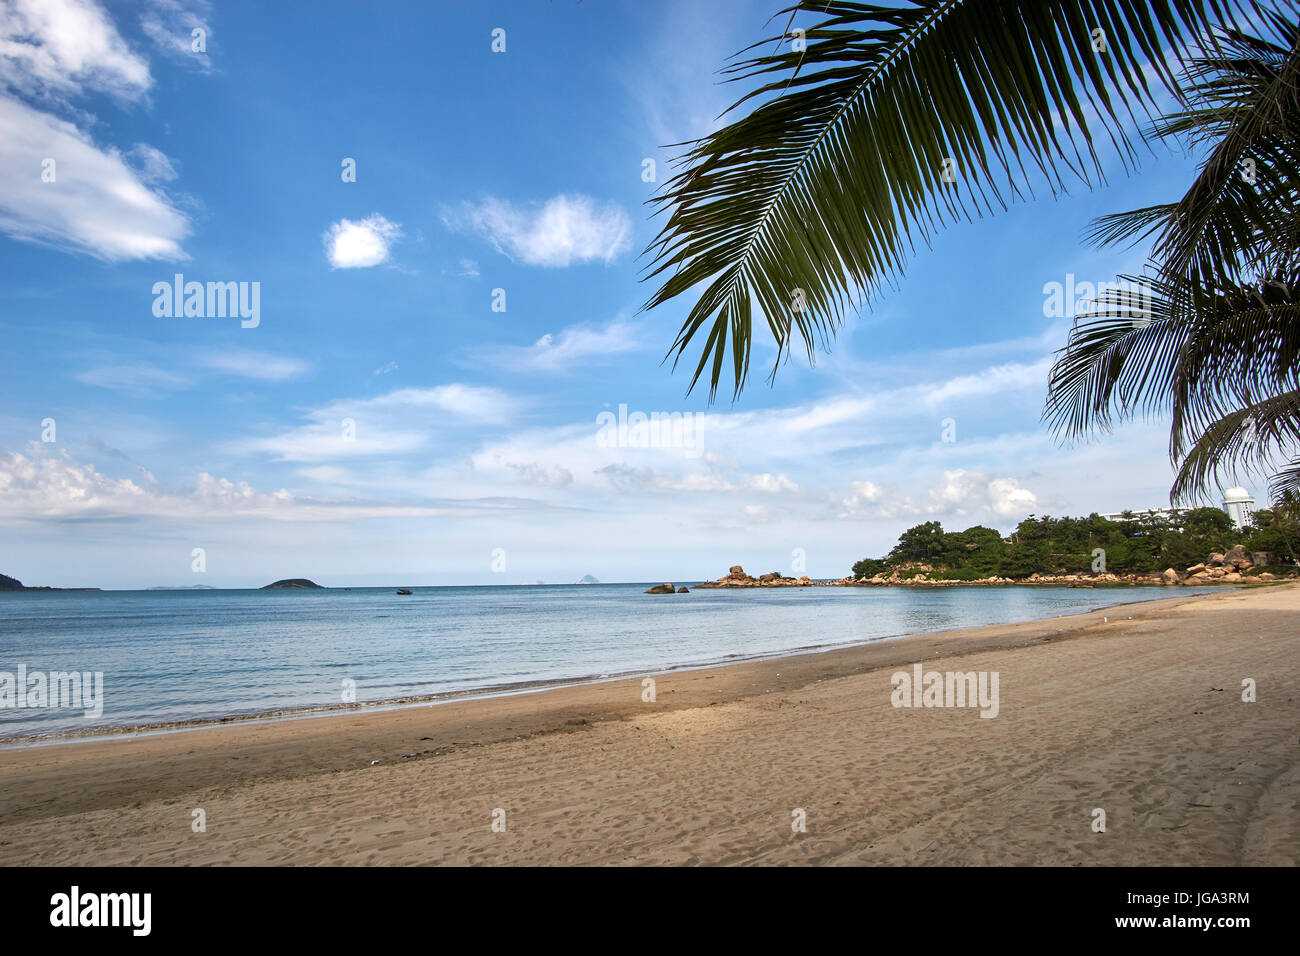 Palm trees with a blue sky with the view to Hong chong at a beach in Nha Trang, Vietnam. Stock Photo